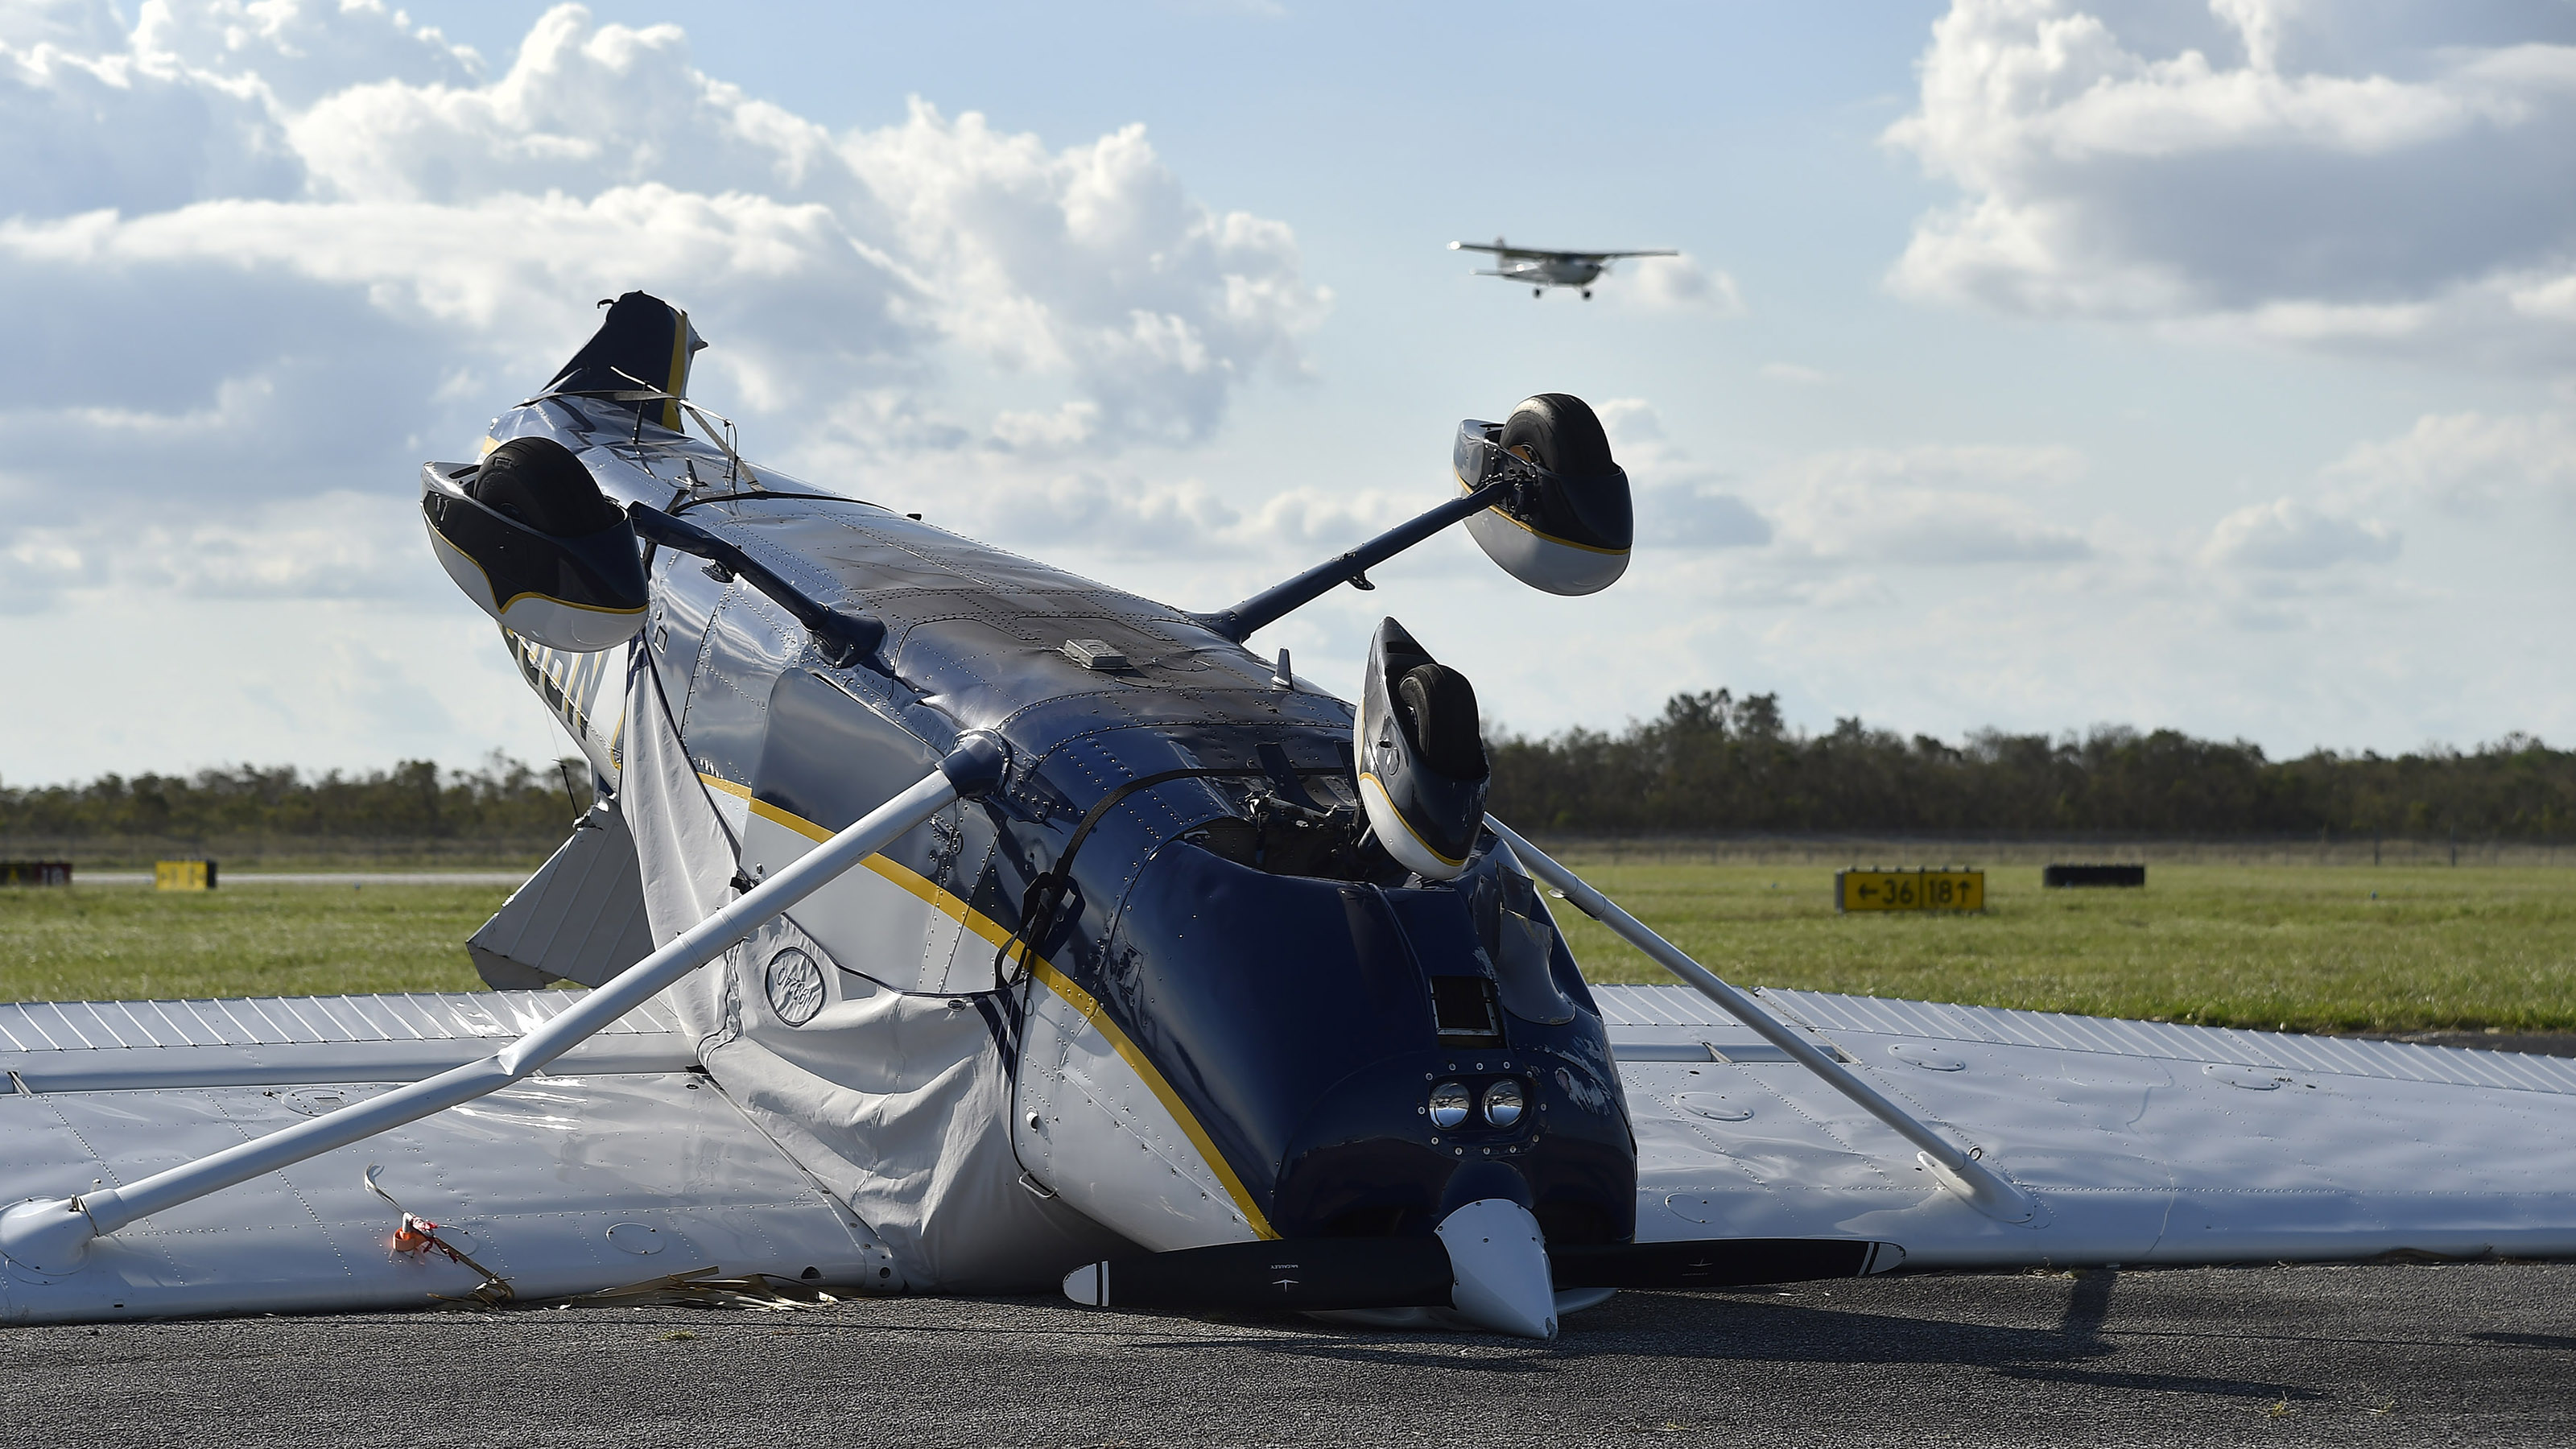 A Cessna at Miami Homestead General Airport is left upended in the wake of Hurricane Irma Sept. 15. Photo by David Tulis.